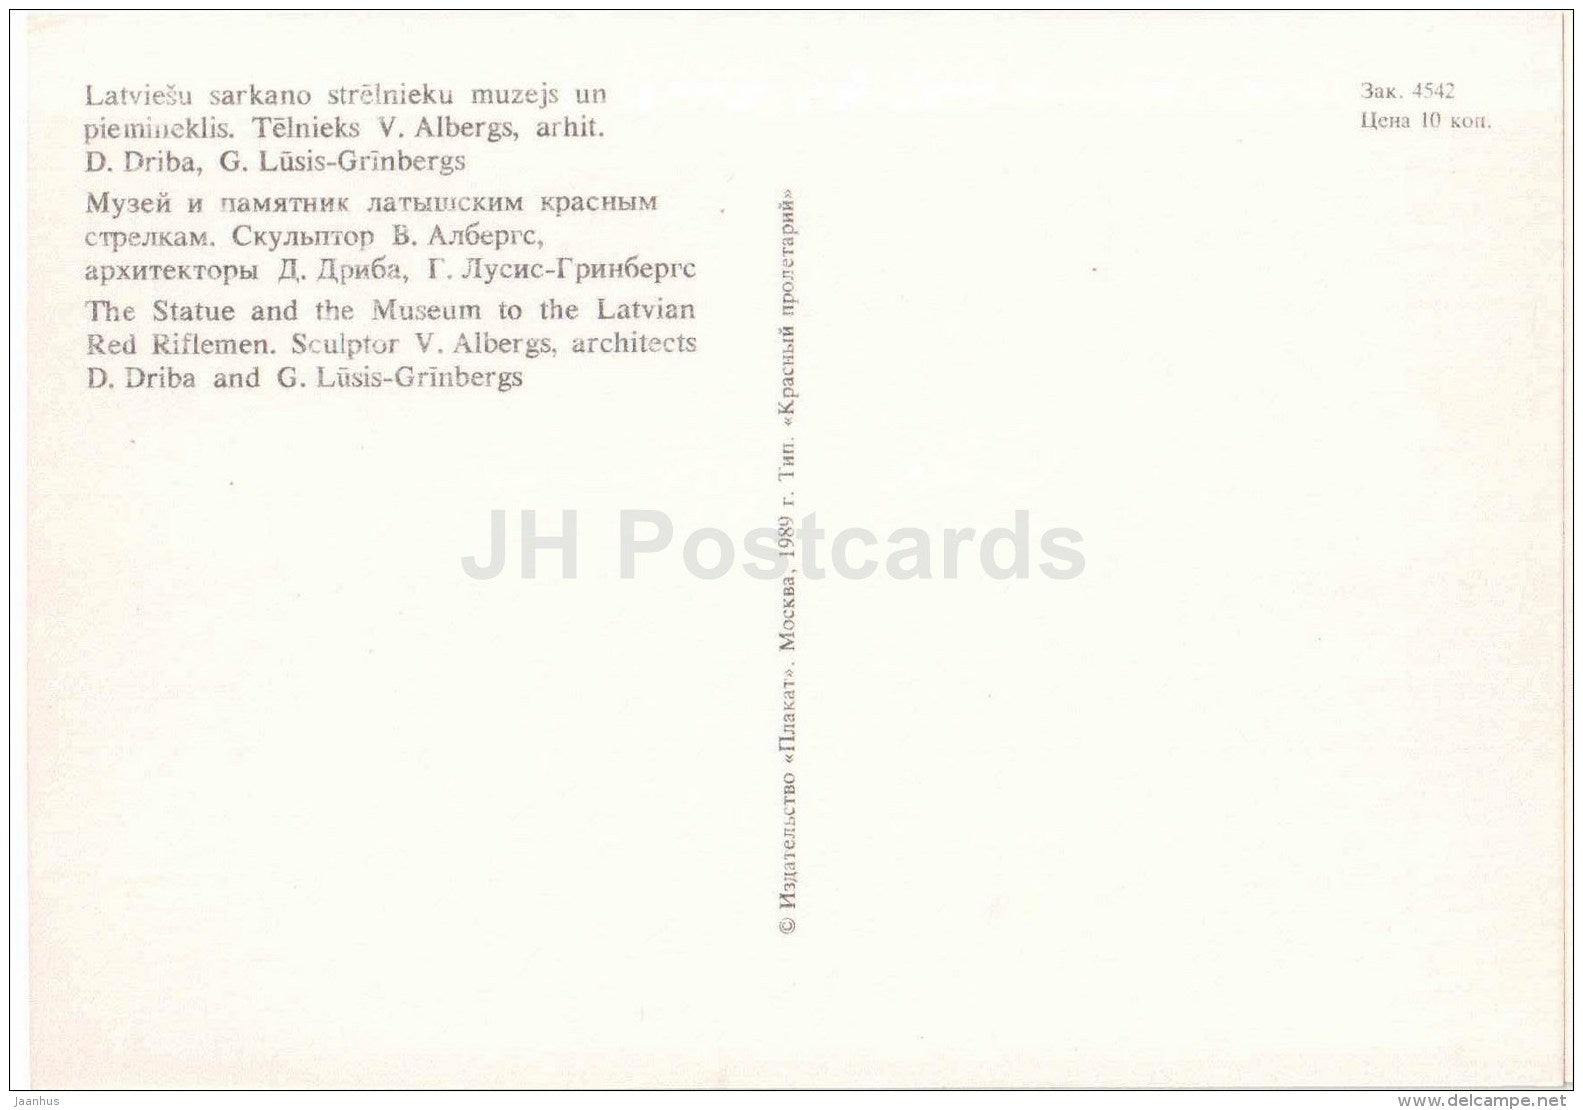 The Statue and the Museum to the Latvian Red Riflemen - Riga - 1989 - Latvia USSR - unused - JH Postcards